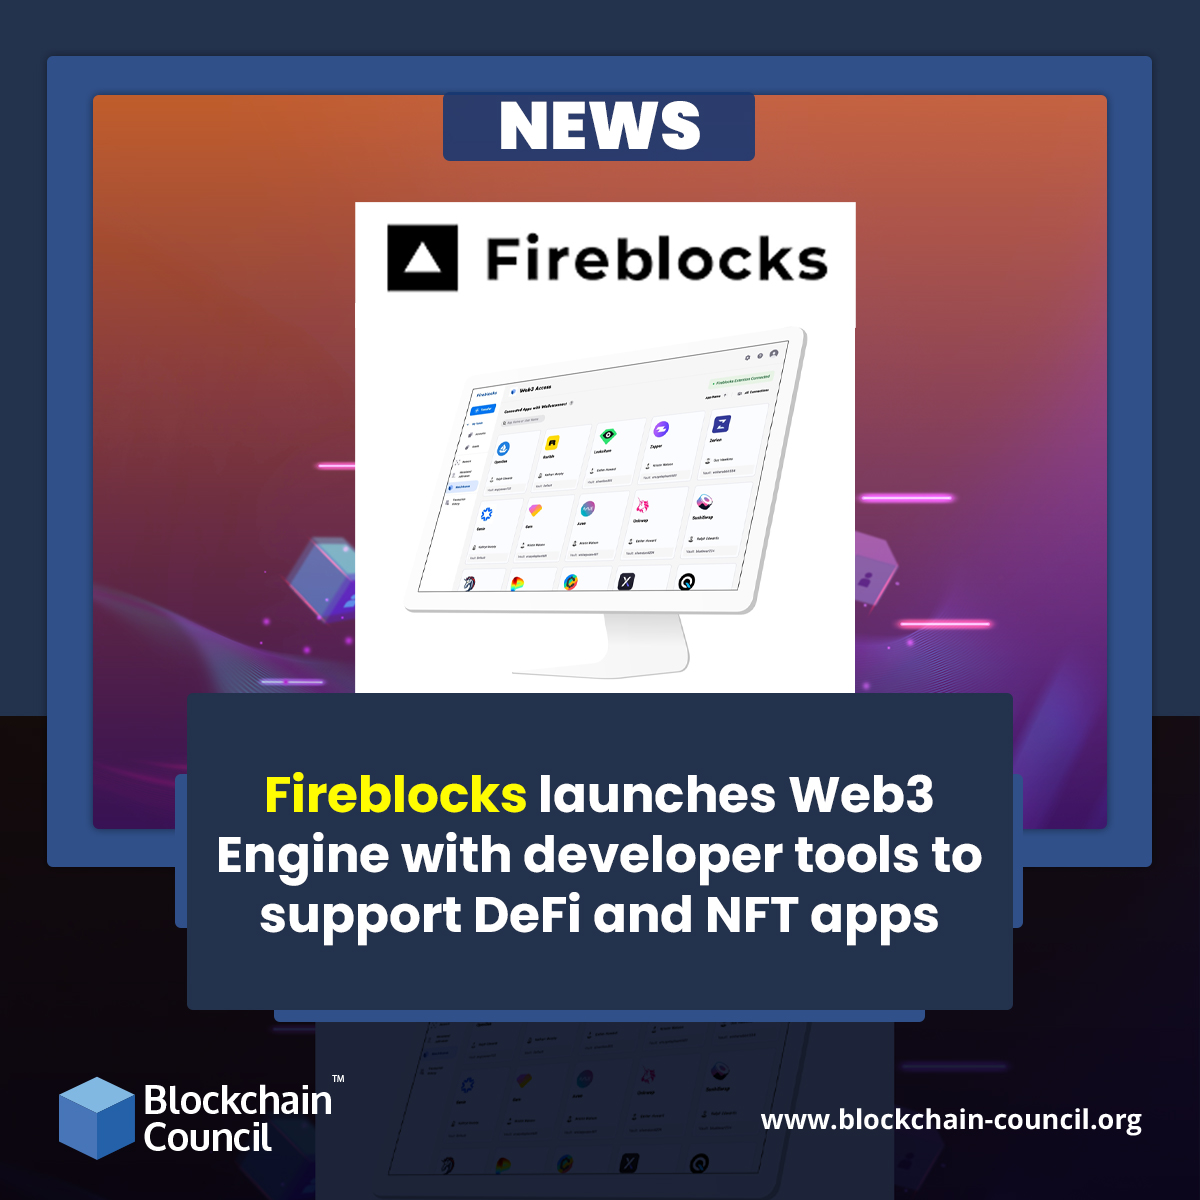 Fireblocks launches Web3 Engine with developer tools to support DeFi and NFT apps